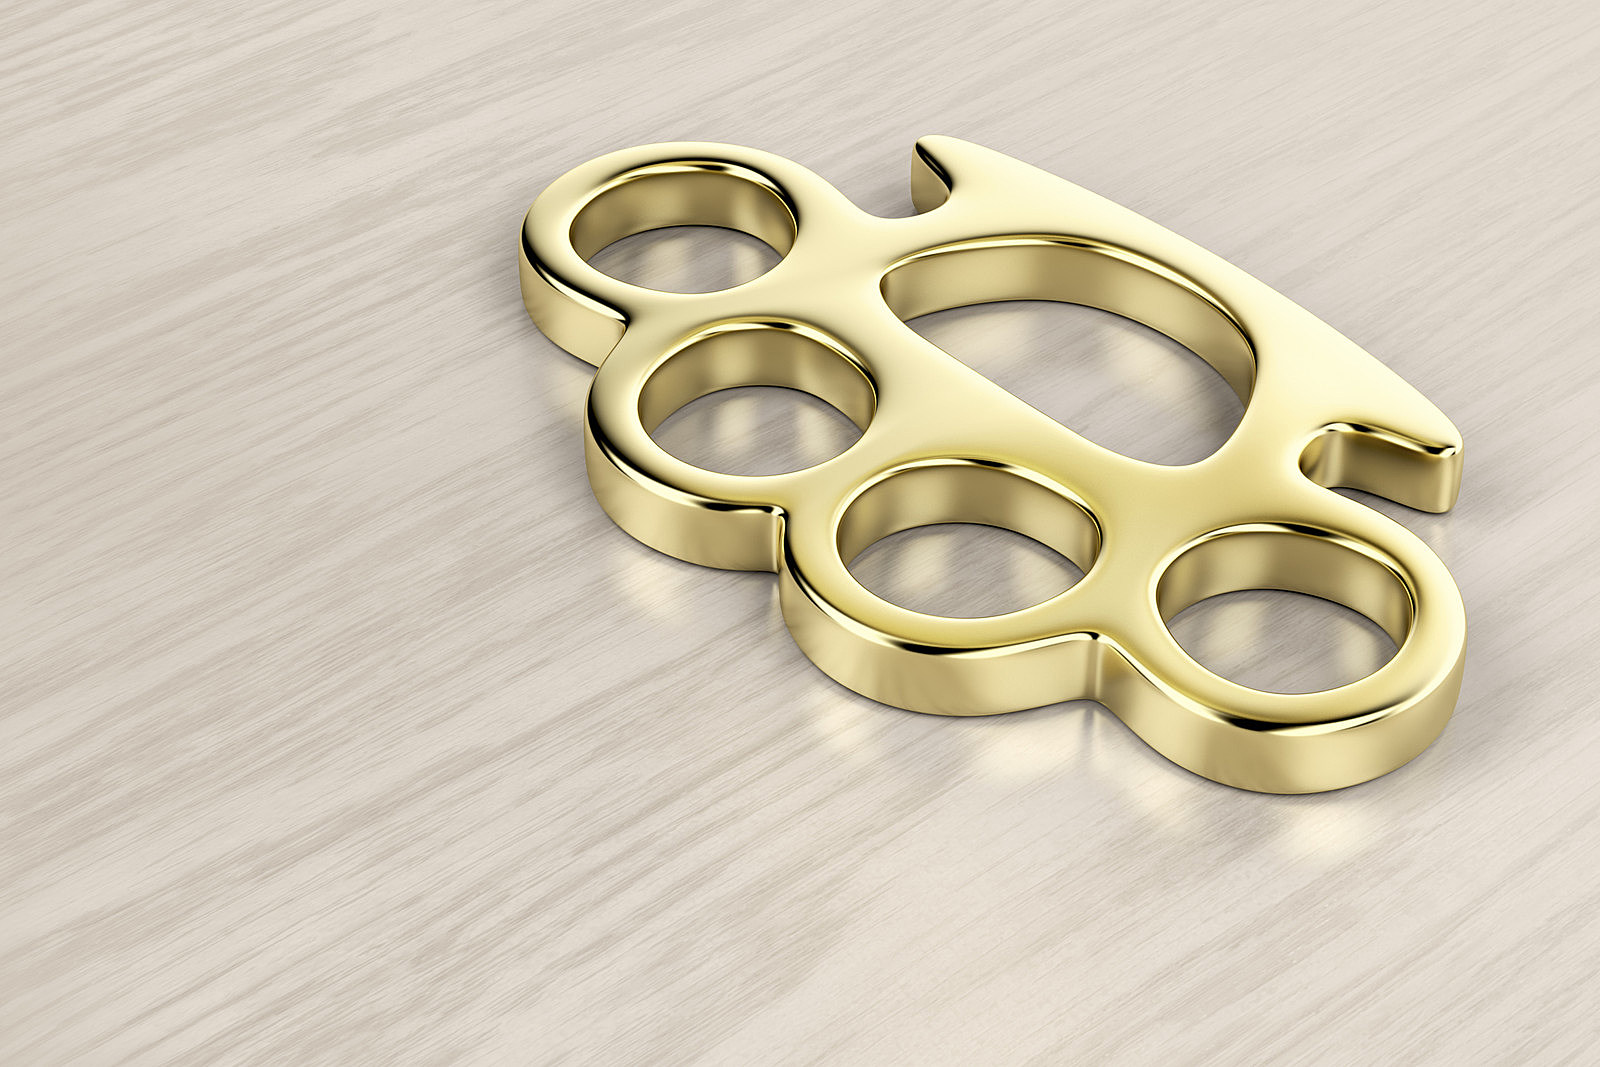 Are Brass Knuckles Illegal? One Michigan Man Finds Out